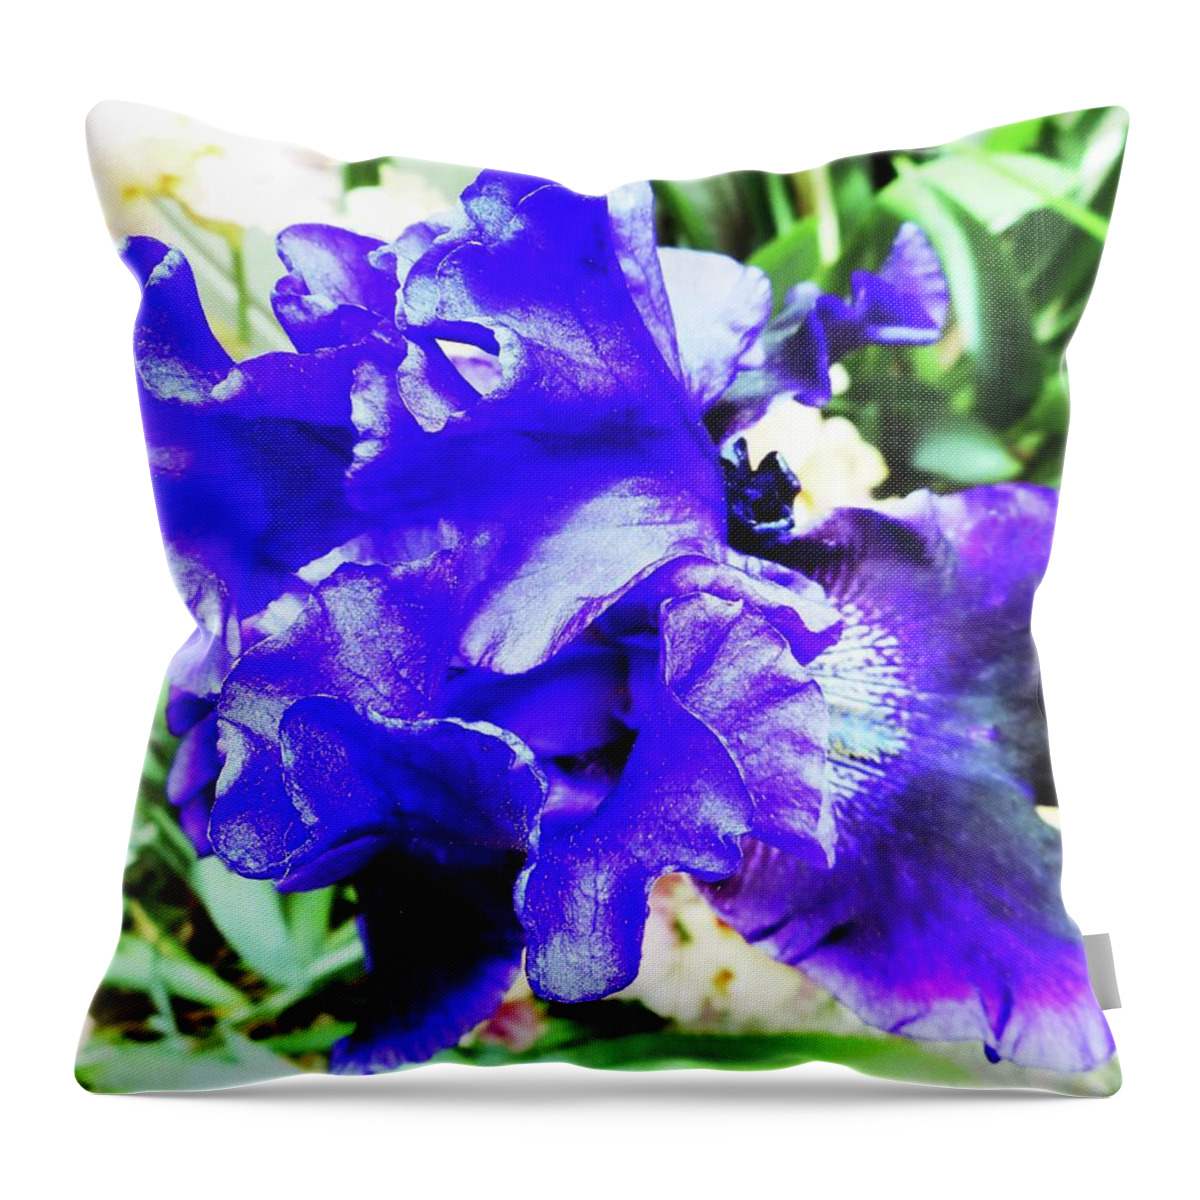 Iris Throw Pillow featuring the photograph Irises 20 by Ron Kandt